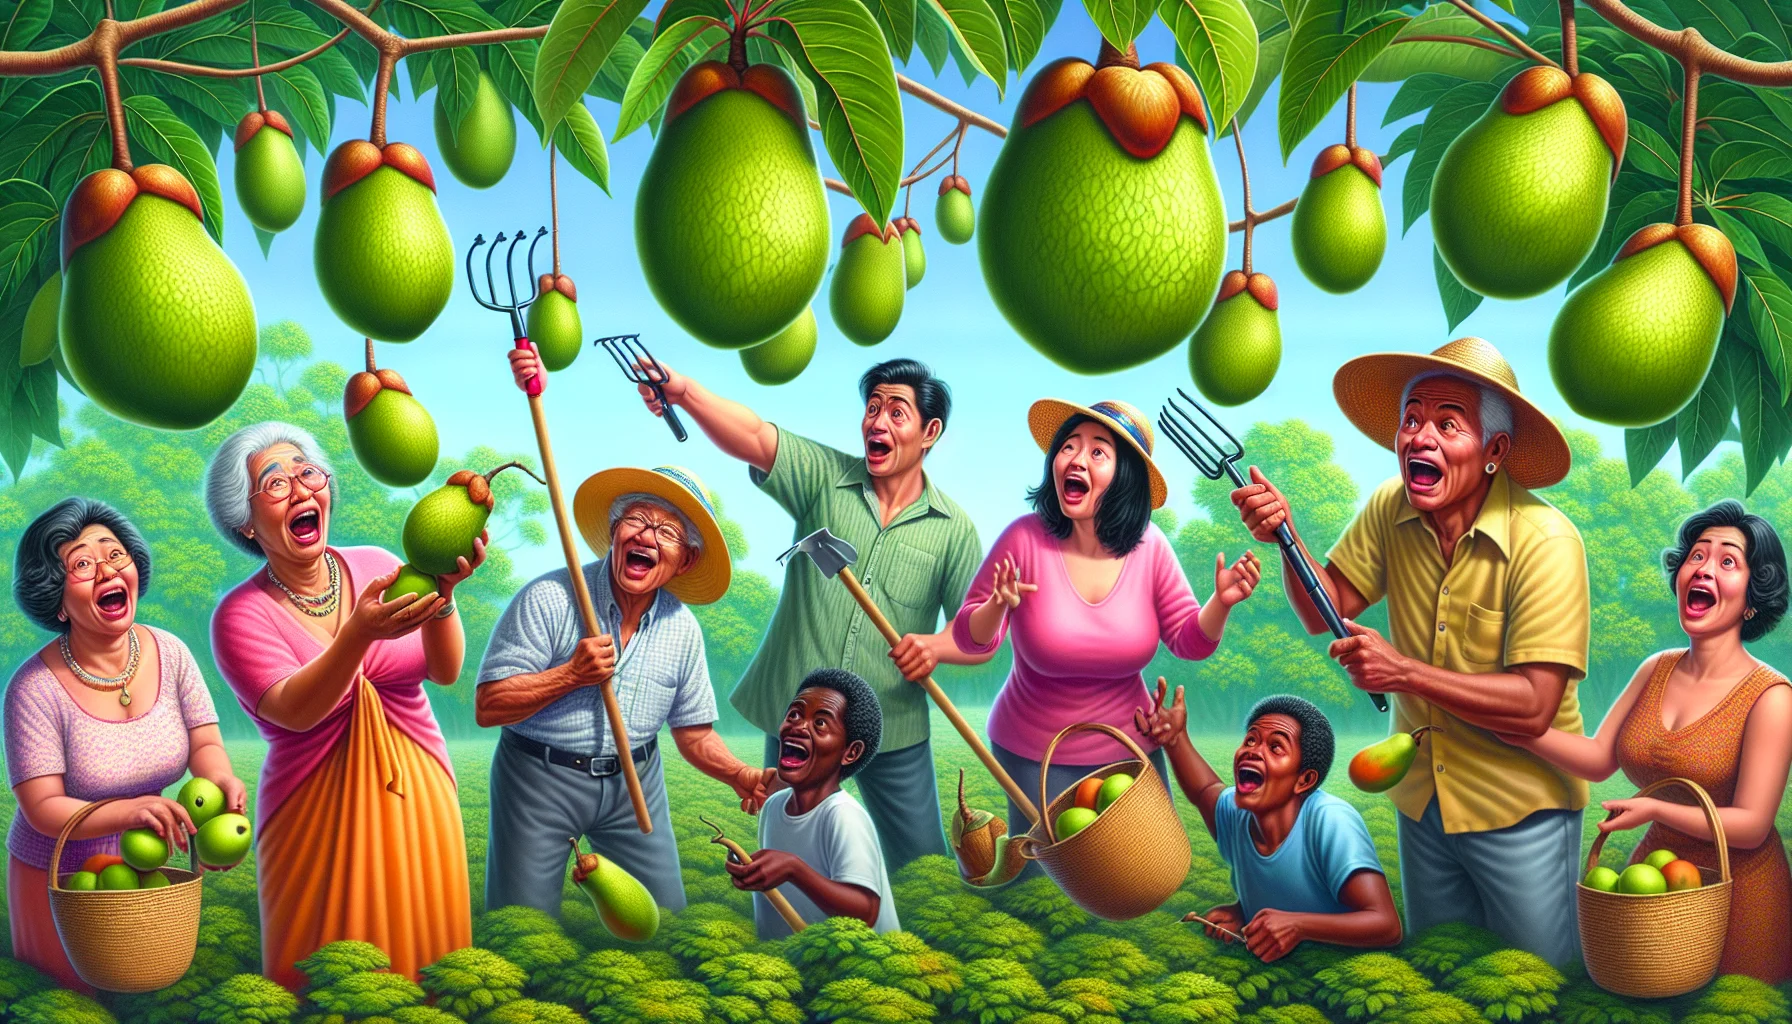 Create a detailed, realistic image depicting a humorous and captivating scene in a vibrant garden. A plethora of Pawpaw fruits, with their green skin and tropical appearance, are shown hanging merrily from lush trees, seemingly dancing in the breeze. Their enticing aroma wafts through the air, drawing the attention of a diverse group of people, including an elderly South Asian woman, a young Caucasian man, a middle-aged Hispanic man, and a Black child with a sunhat. They seem intrigued and drawn by the fruit, each with gardening tools in their hands, ready to partake in the delight of gardening. Their expressions of surprise, intrigue, and excitement are mixed with laughter, promoting the joy and fun of gardening.